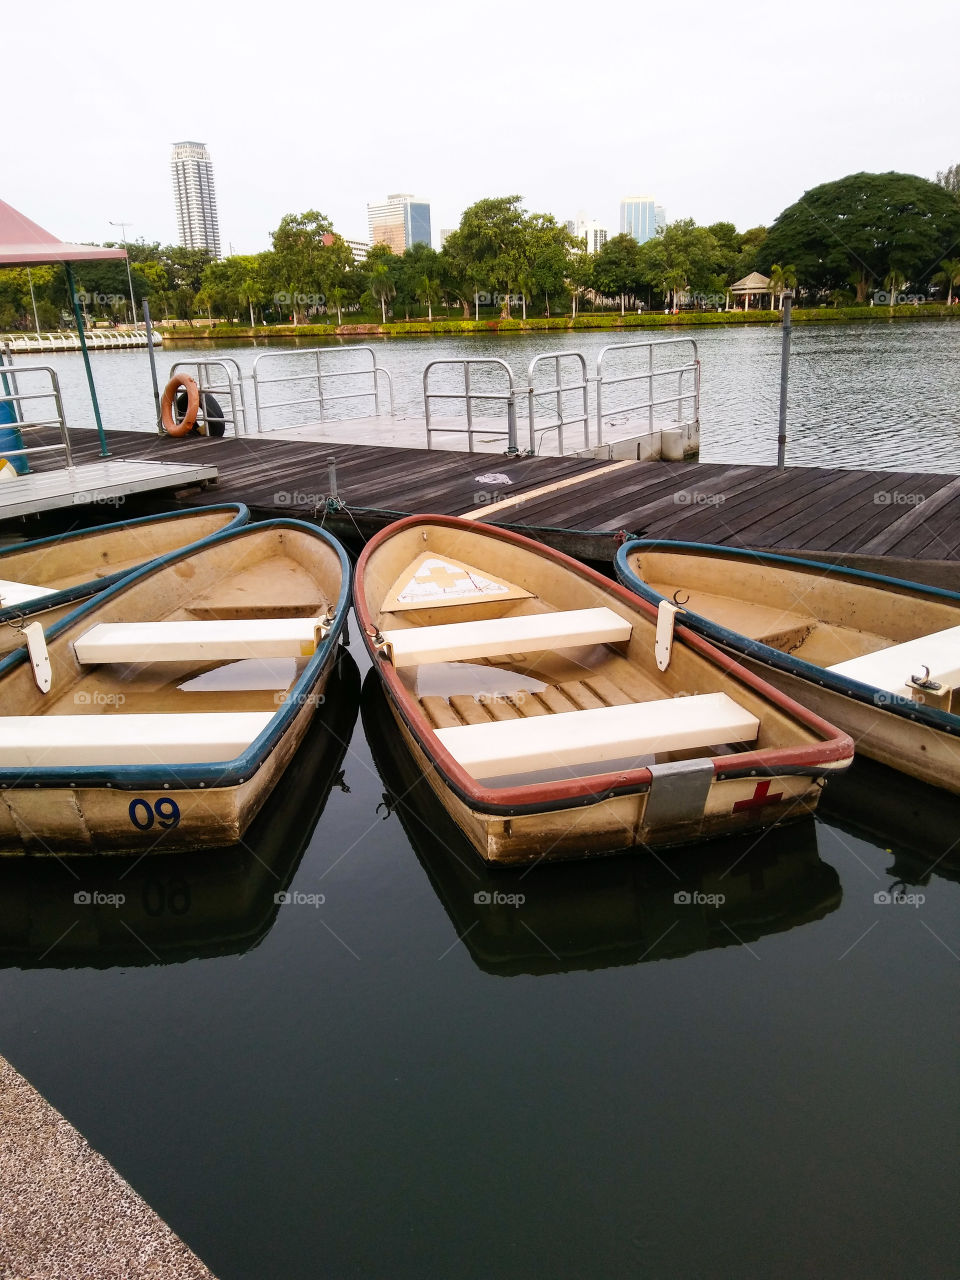 Paddle boat in the park for rowing